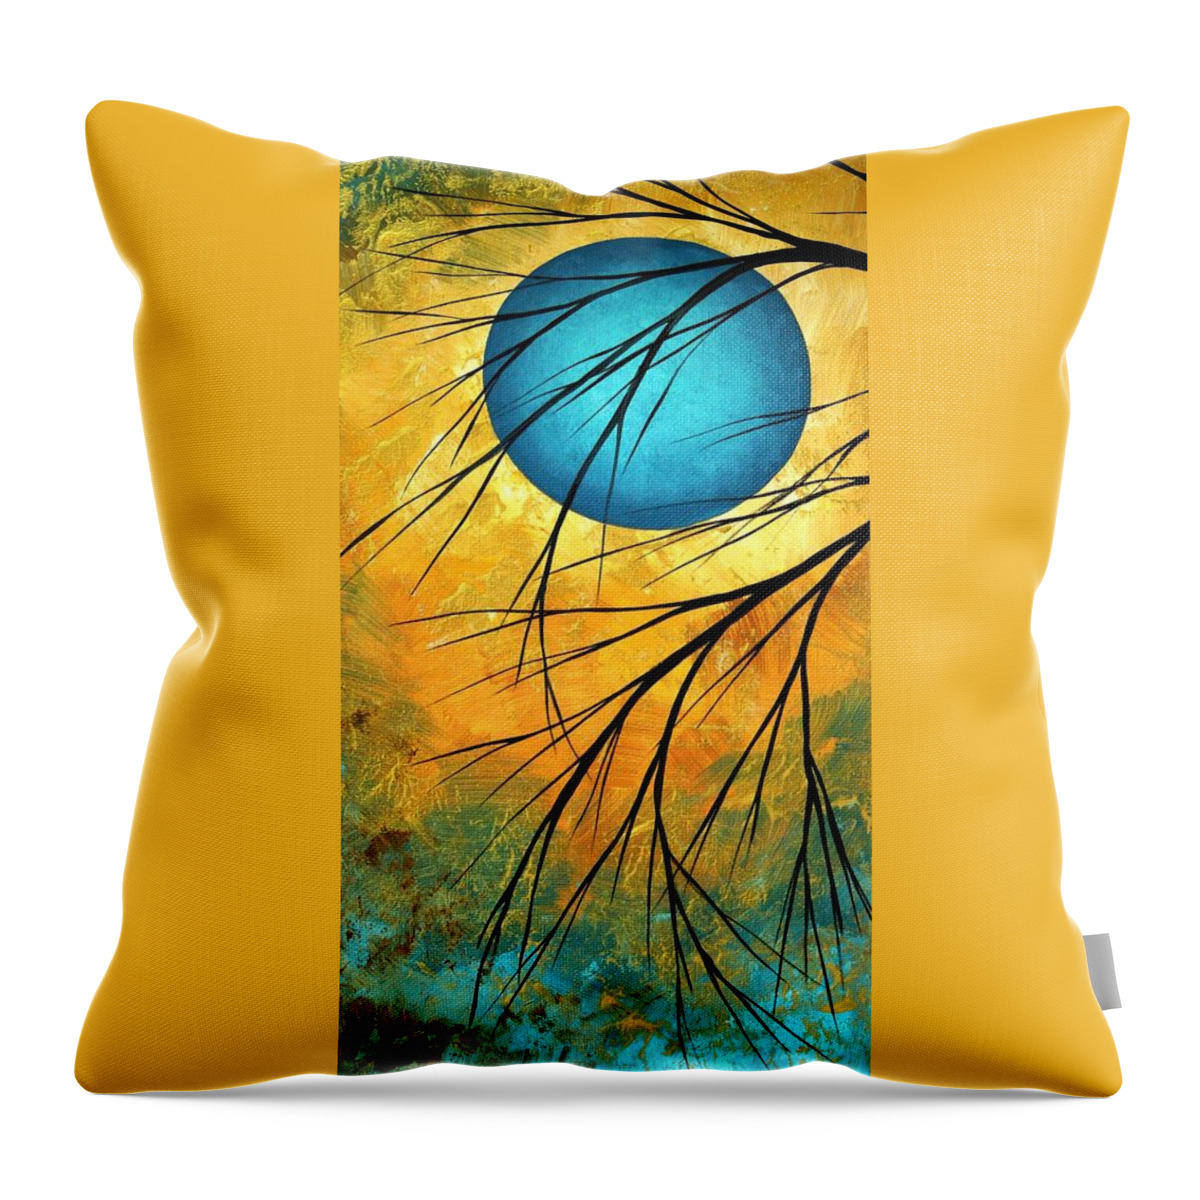 Abstract Throw Pillow featuring the painting Abstract Landscape Art PASSING BEAUTY 1 of 5 by Megan Duncanson